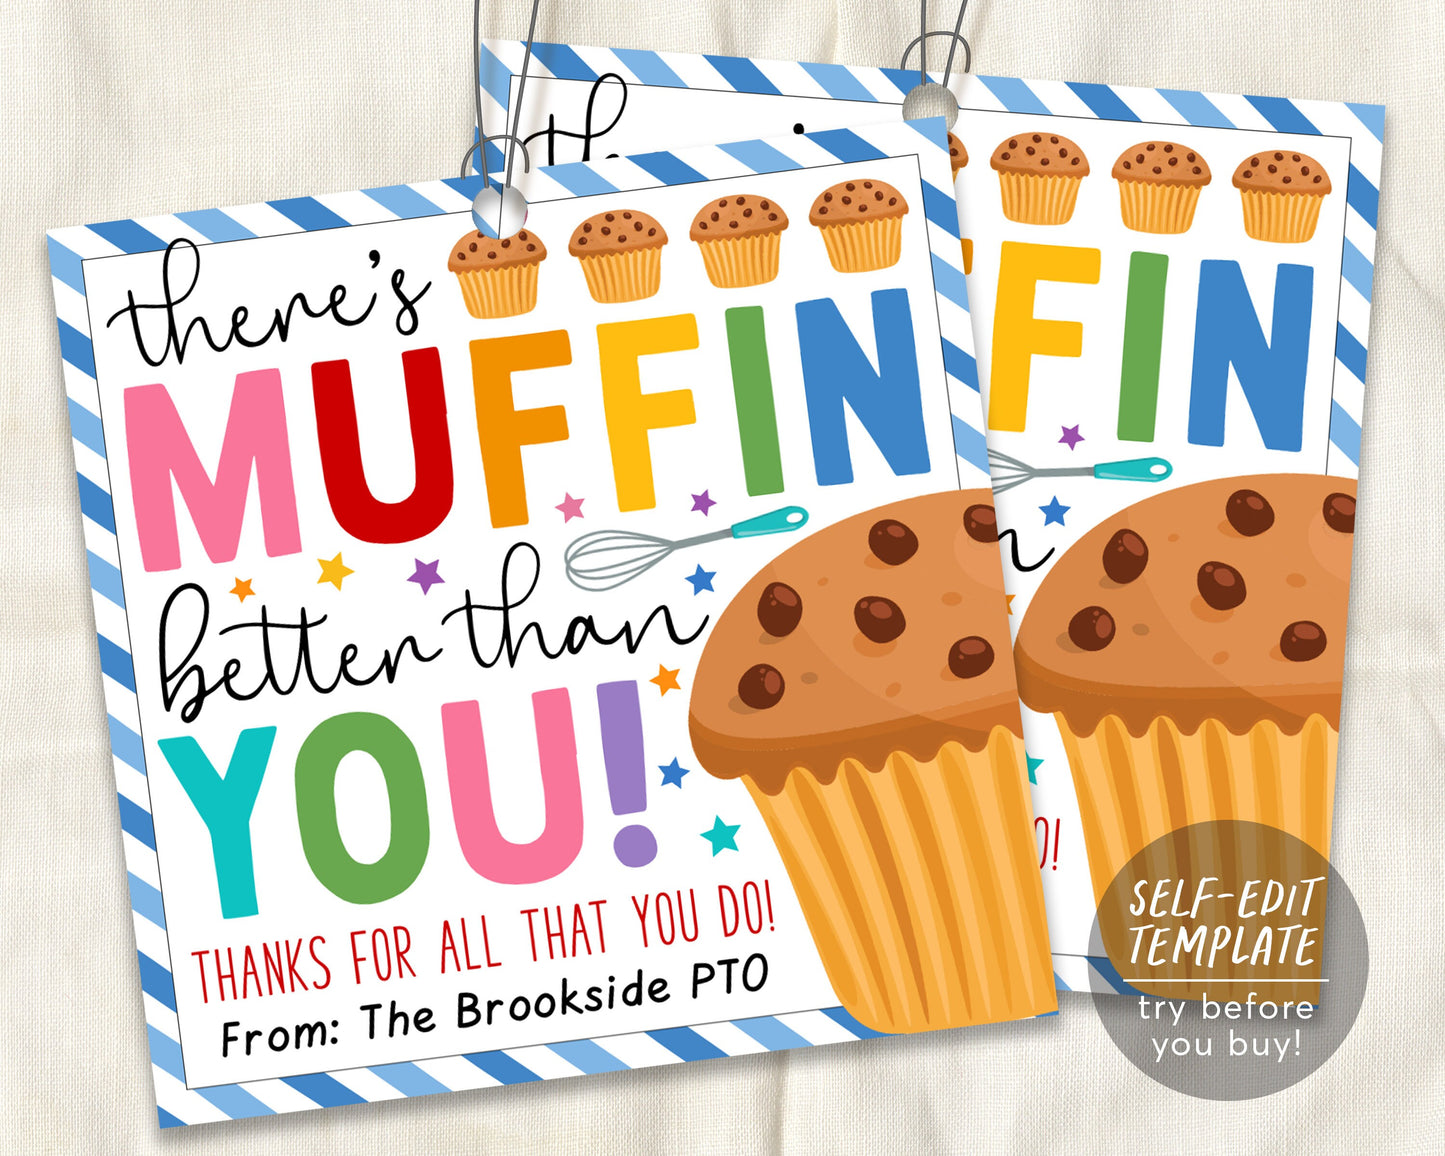 Muffin Gift Tag Editable Template, There's Muffin Better Than You Favor Treat Tags, Friend Teacher PTO PTA Staff Thank You Appreciation DIY